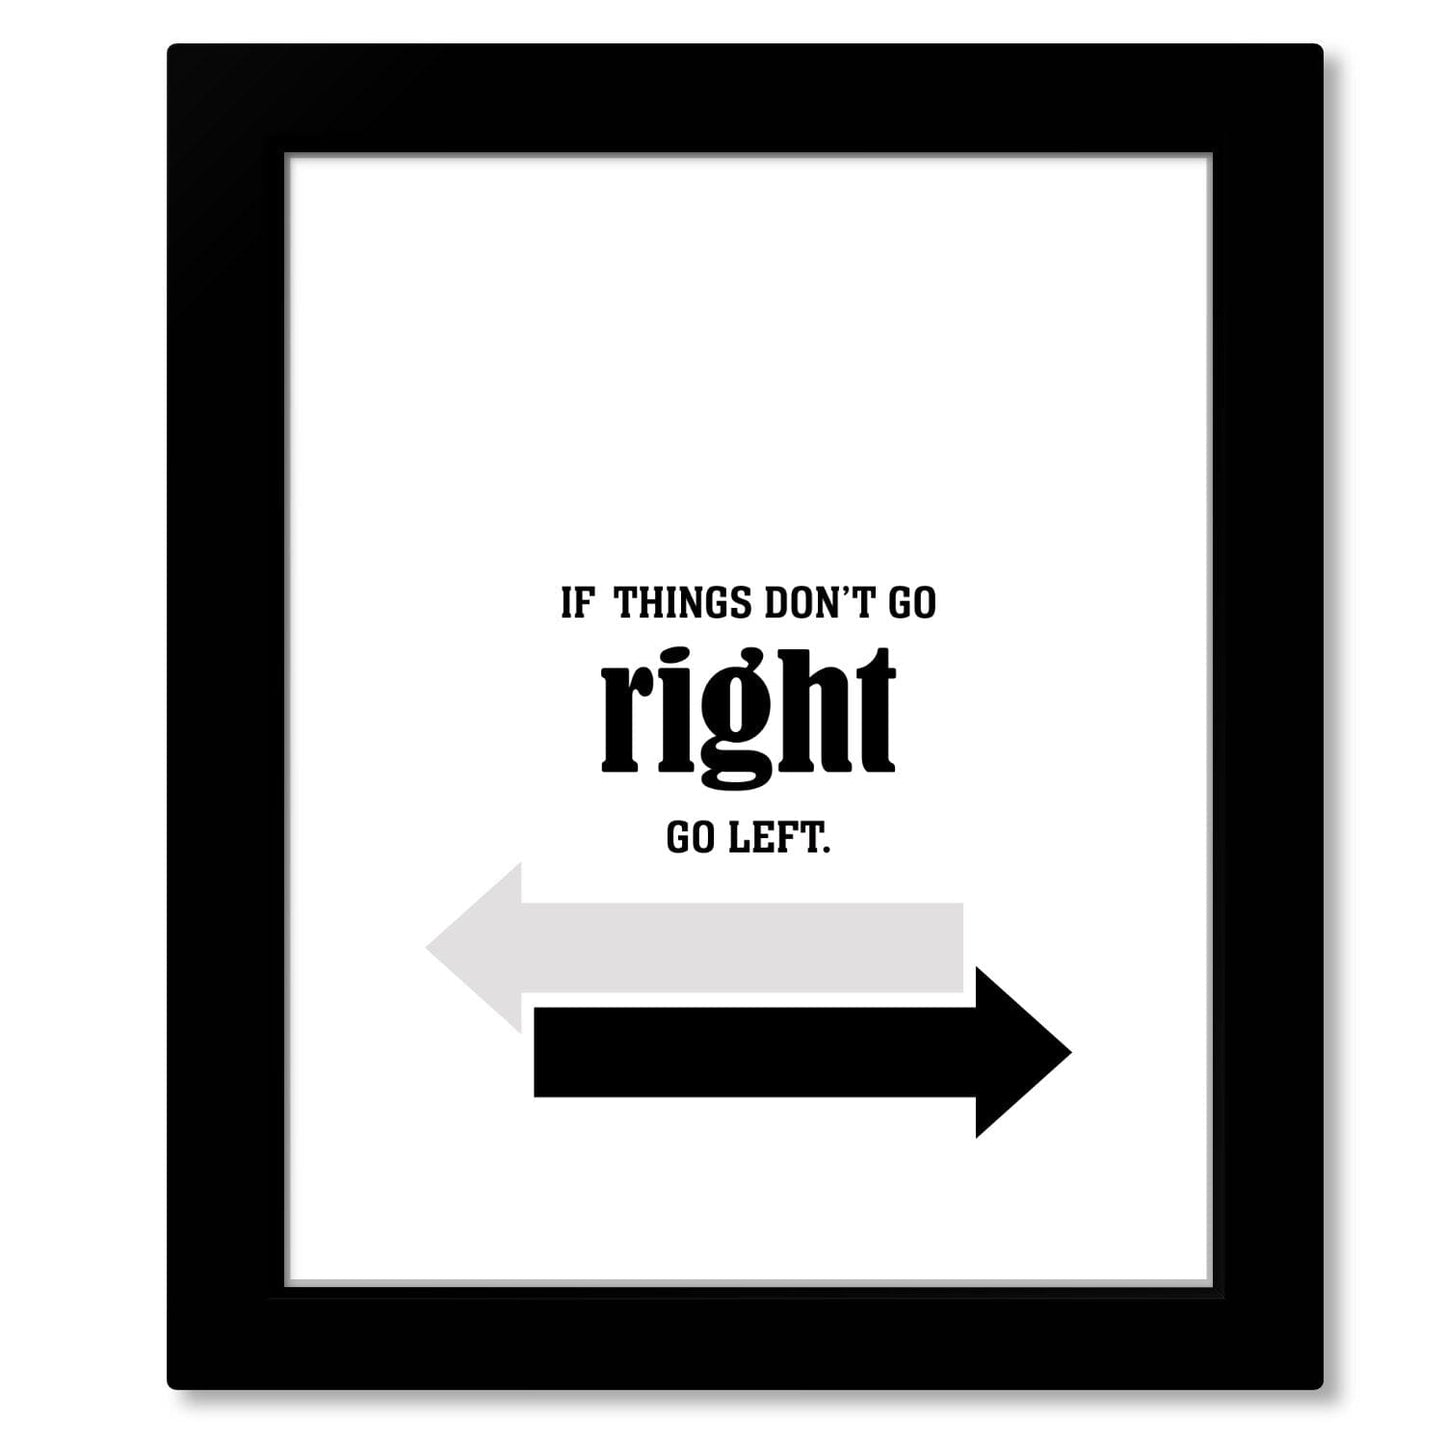 If Things Don't go Right, Go Left - Wise and Witty Word Art Wise and Wiseass Quotes Song Lyrics Art 8x10 Framed Print 